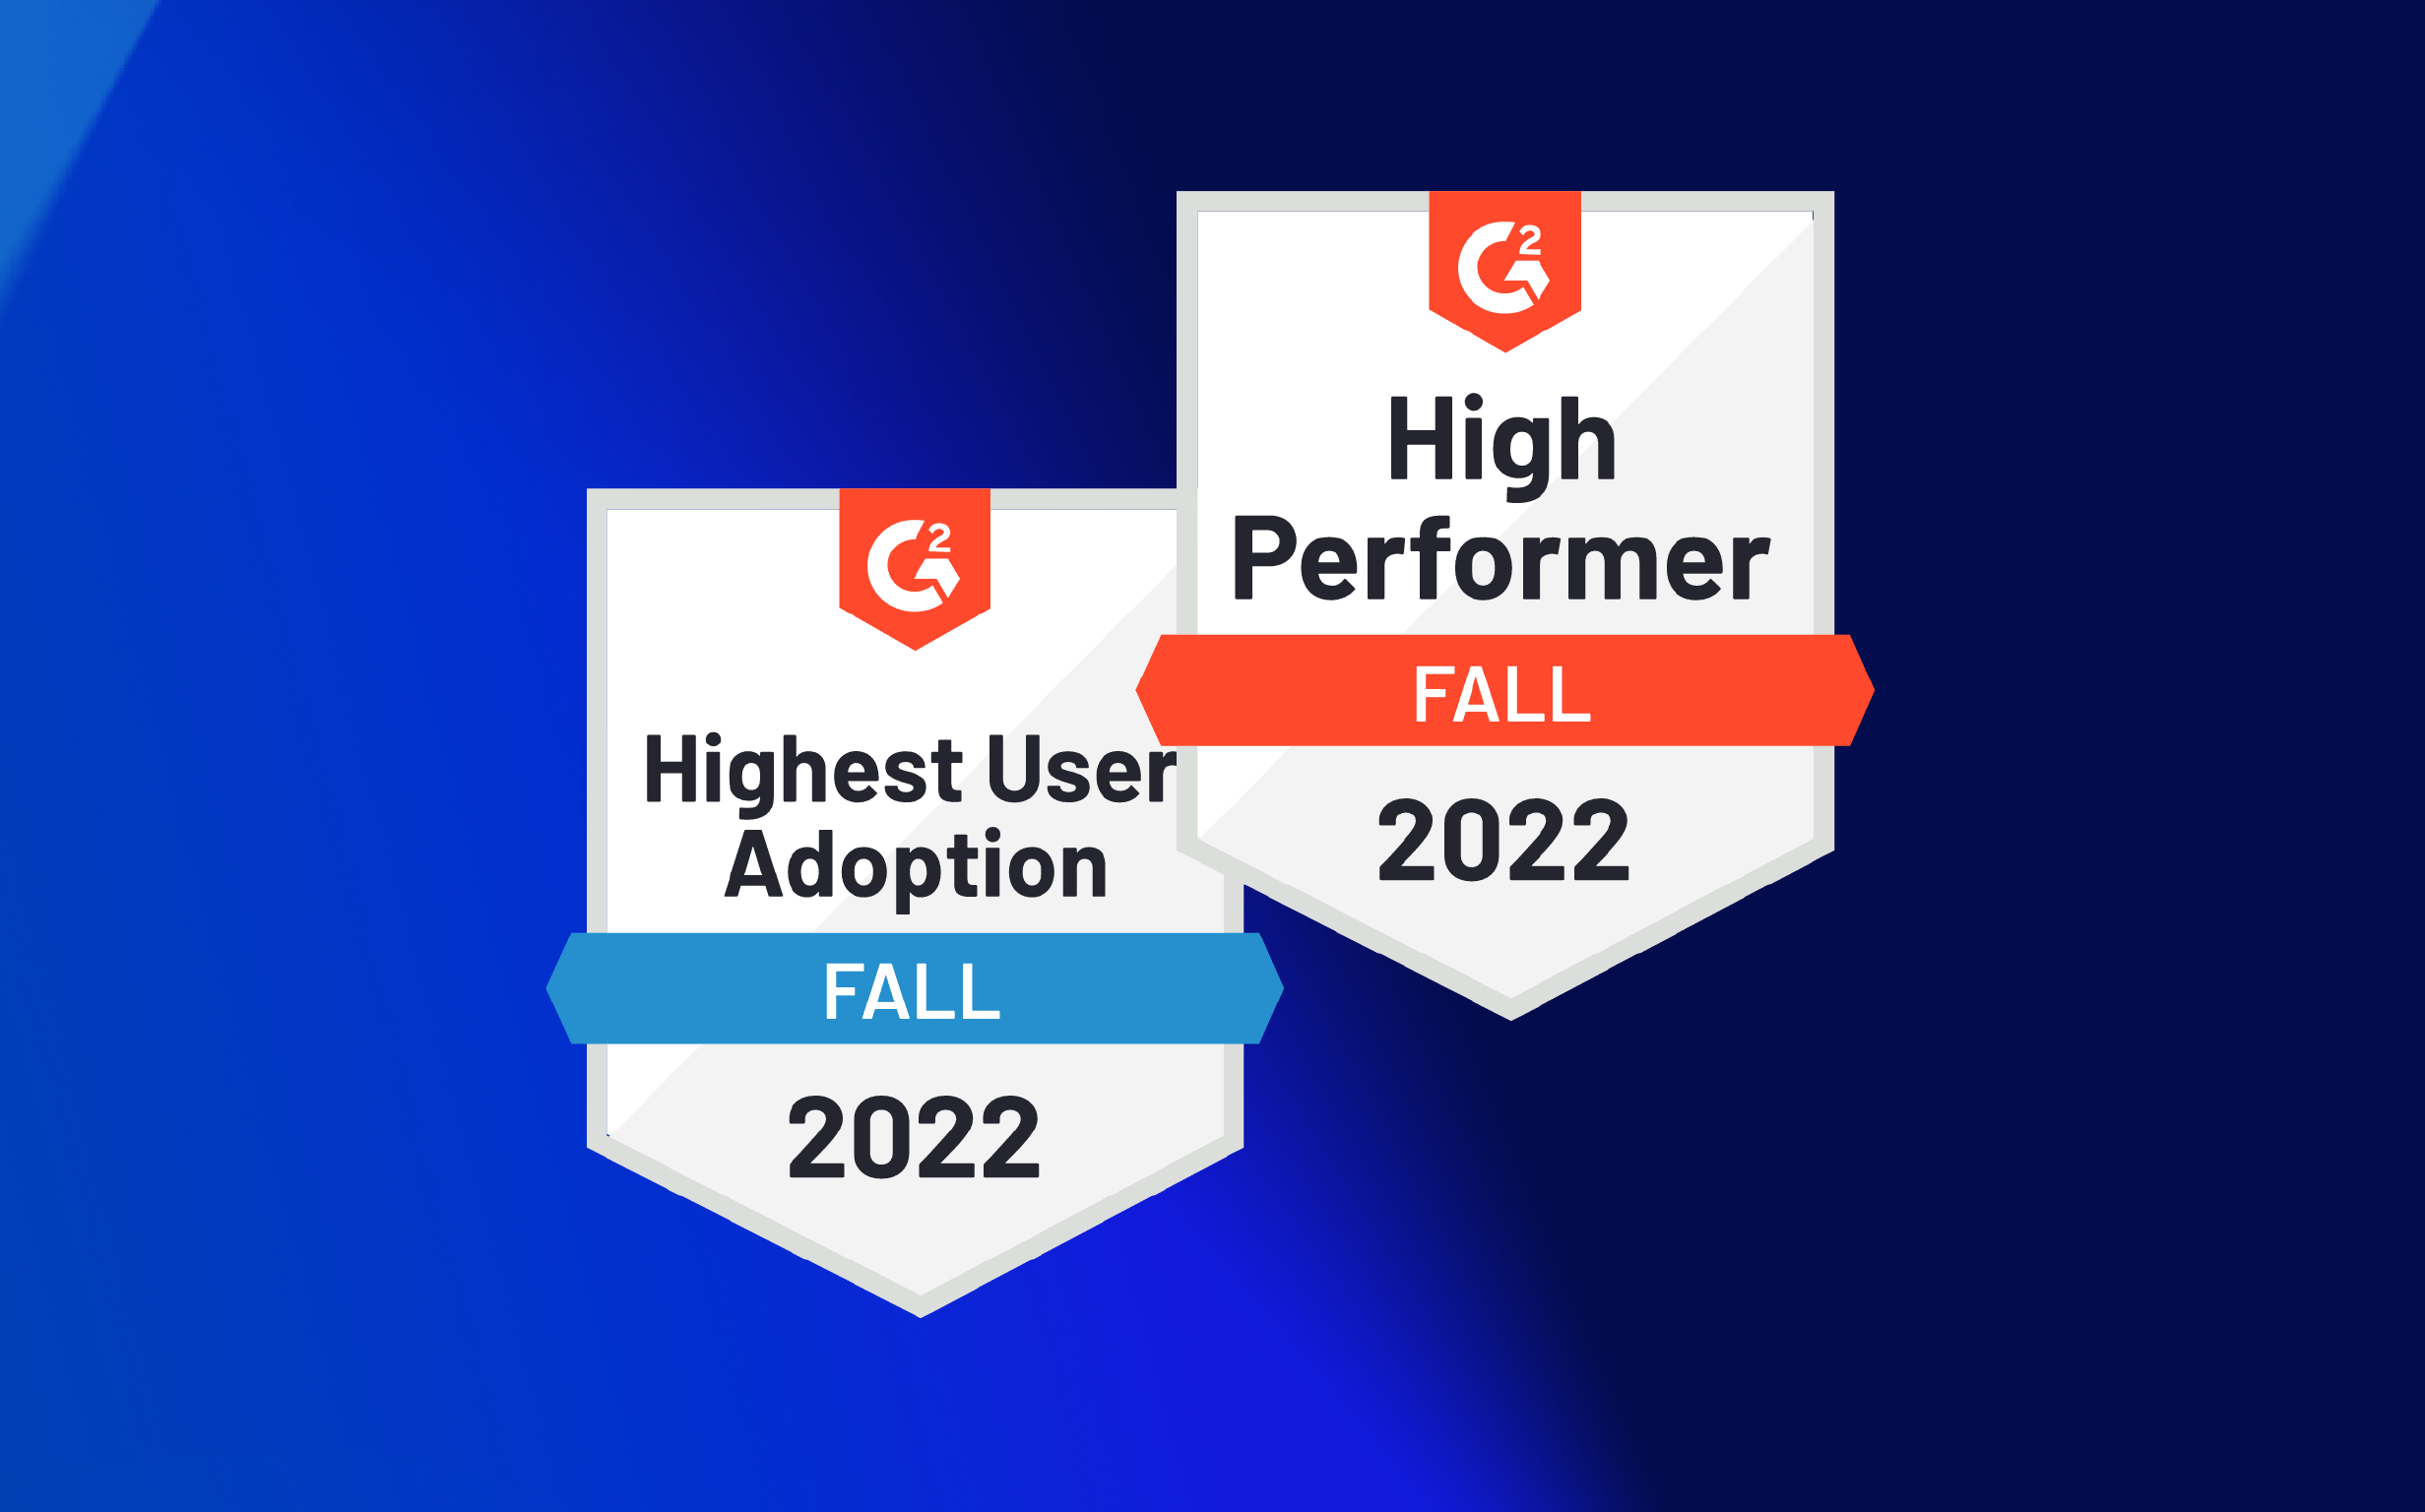 Airbrake Achieves Highest User Adoption in G2’s Fall 2022 Reports